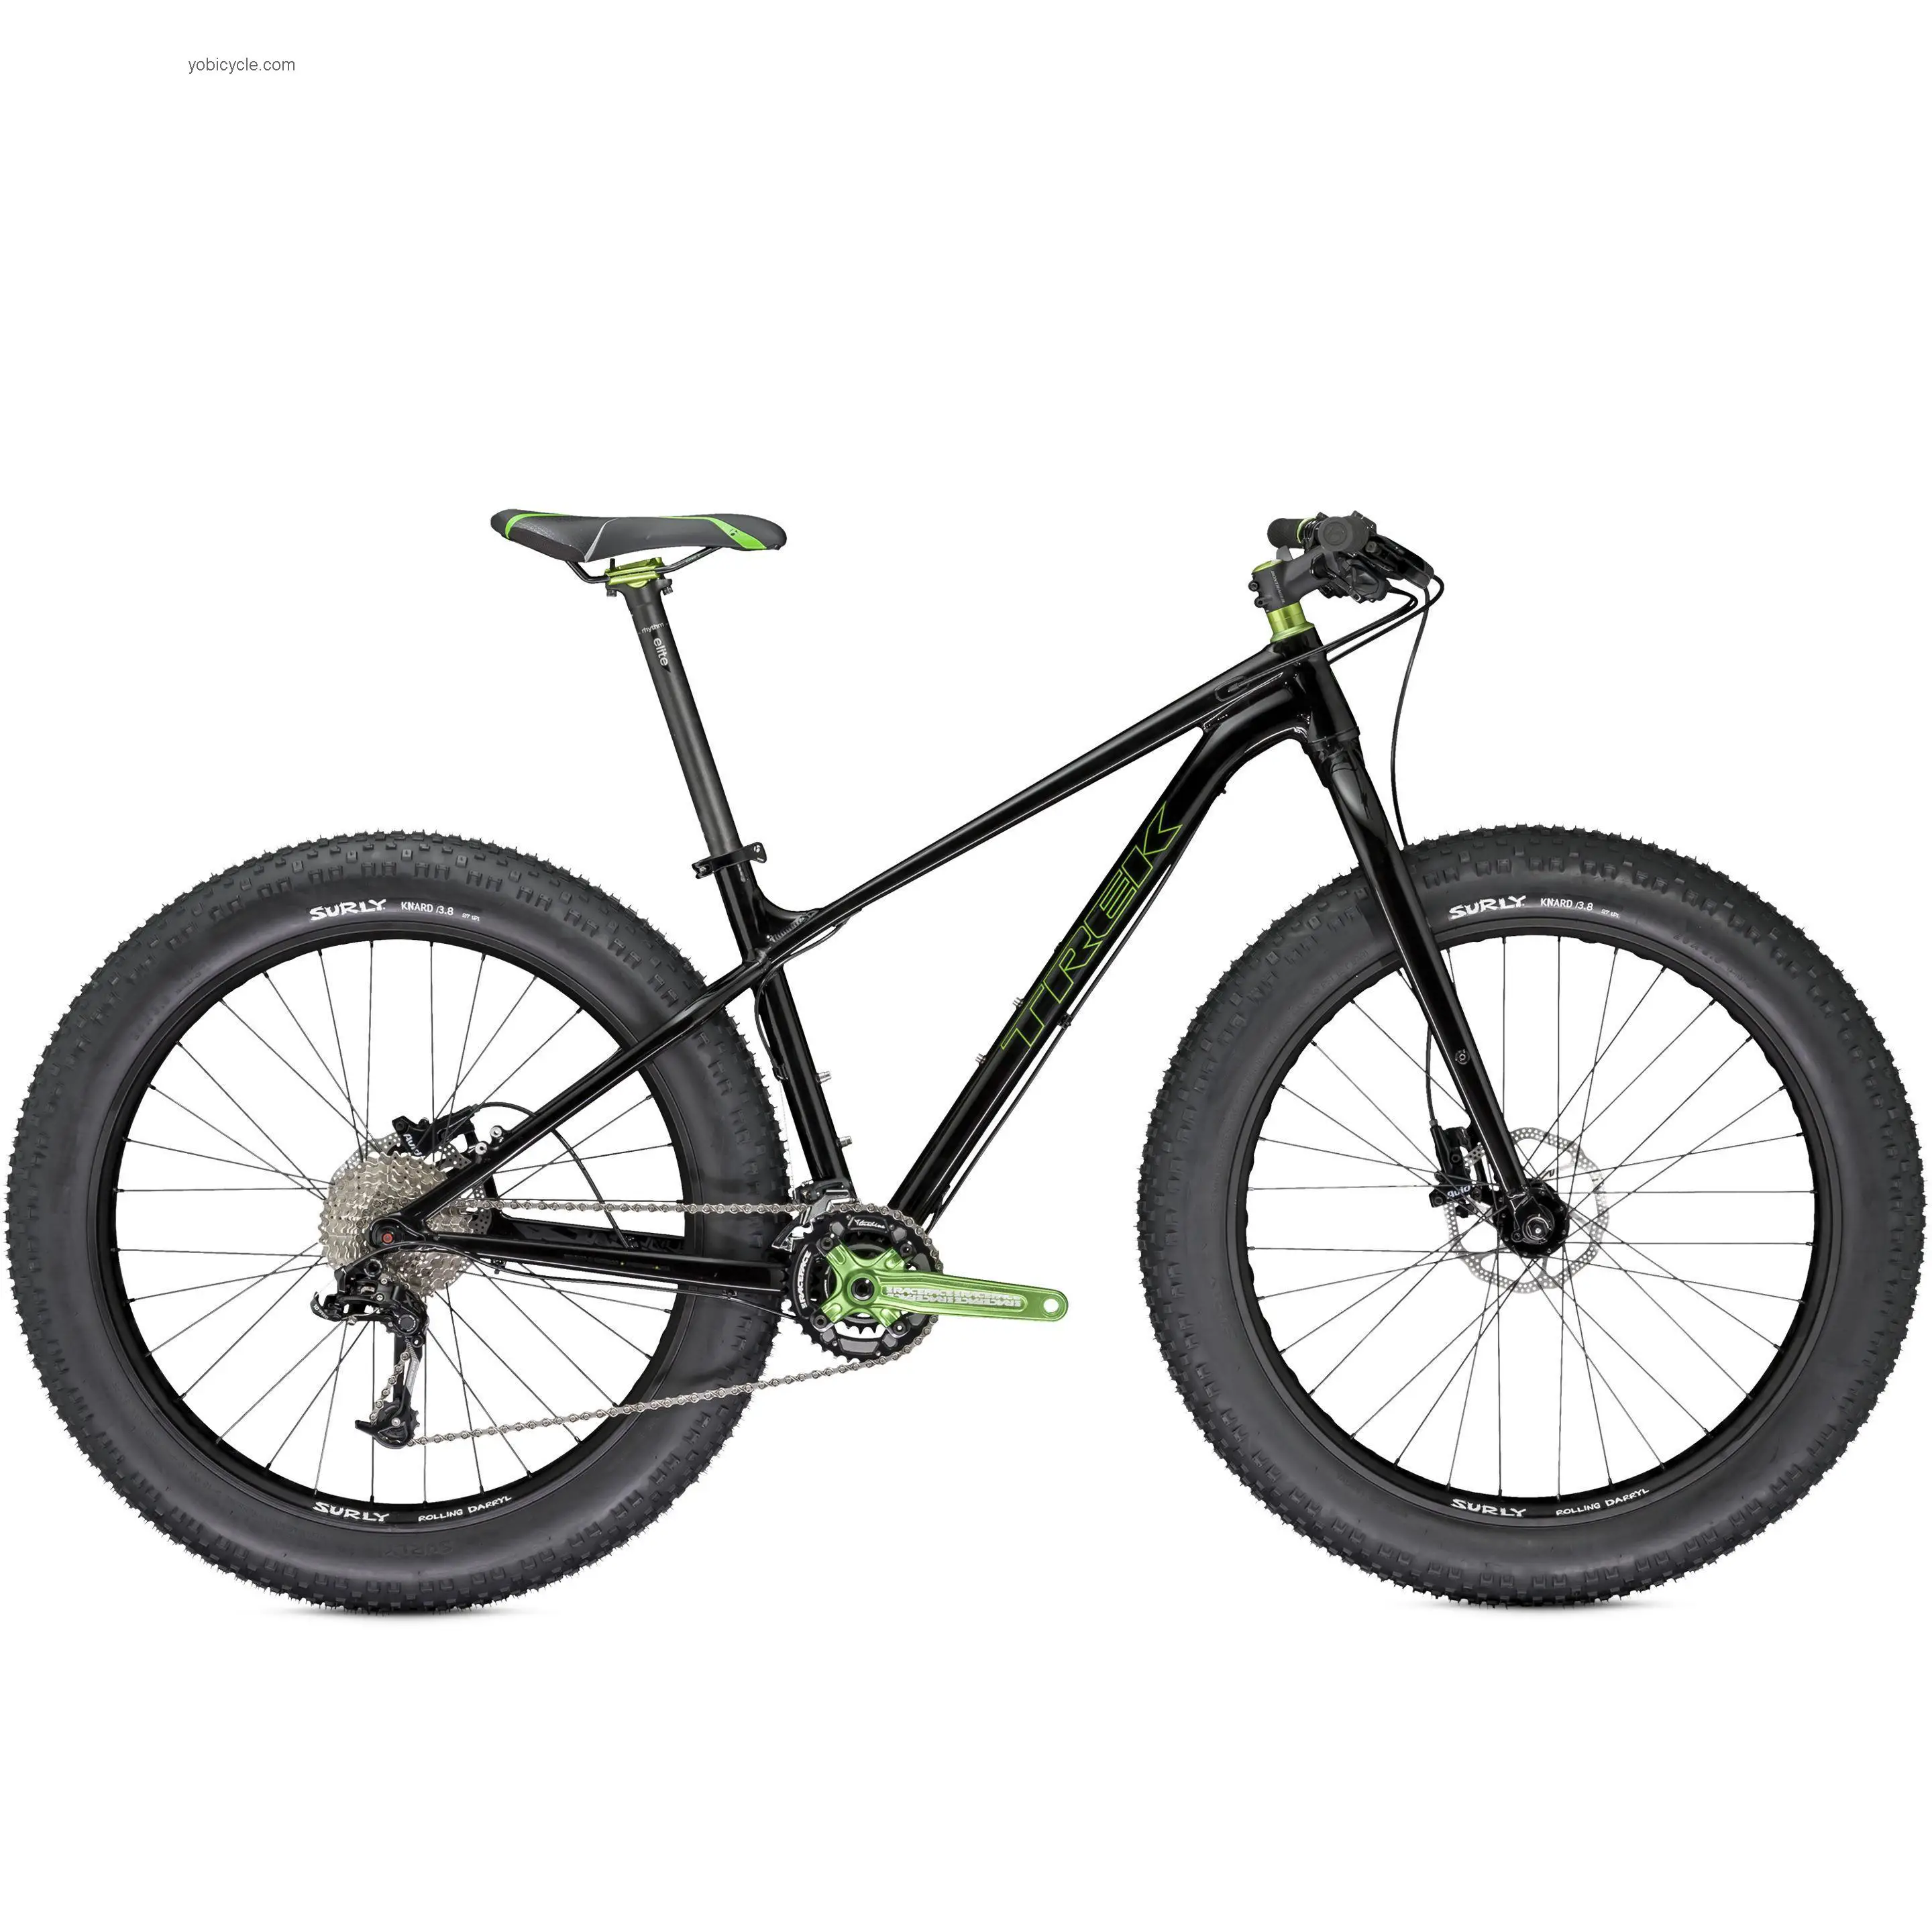 Trek Farley competitors and comparison tool online specs and performance